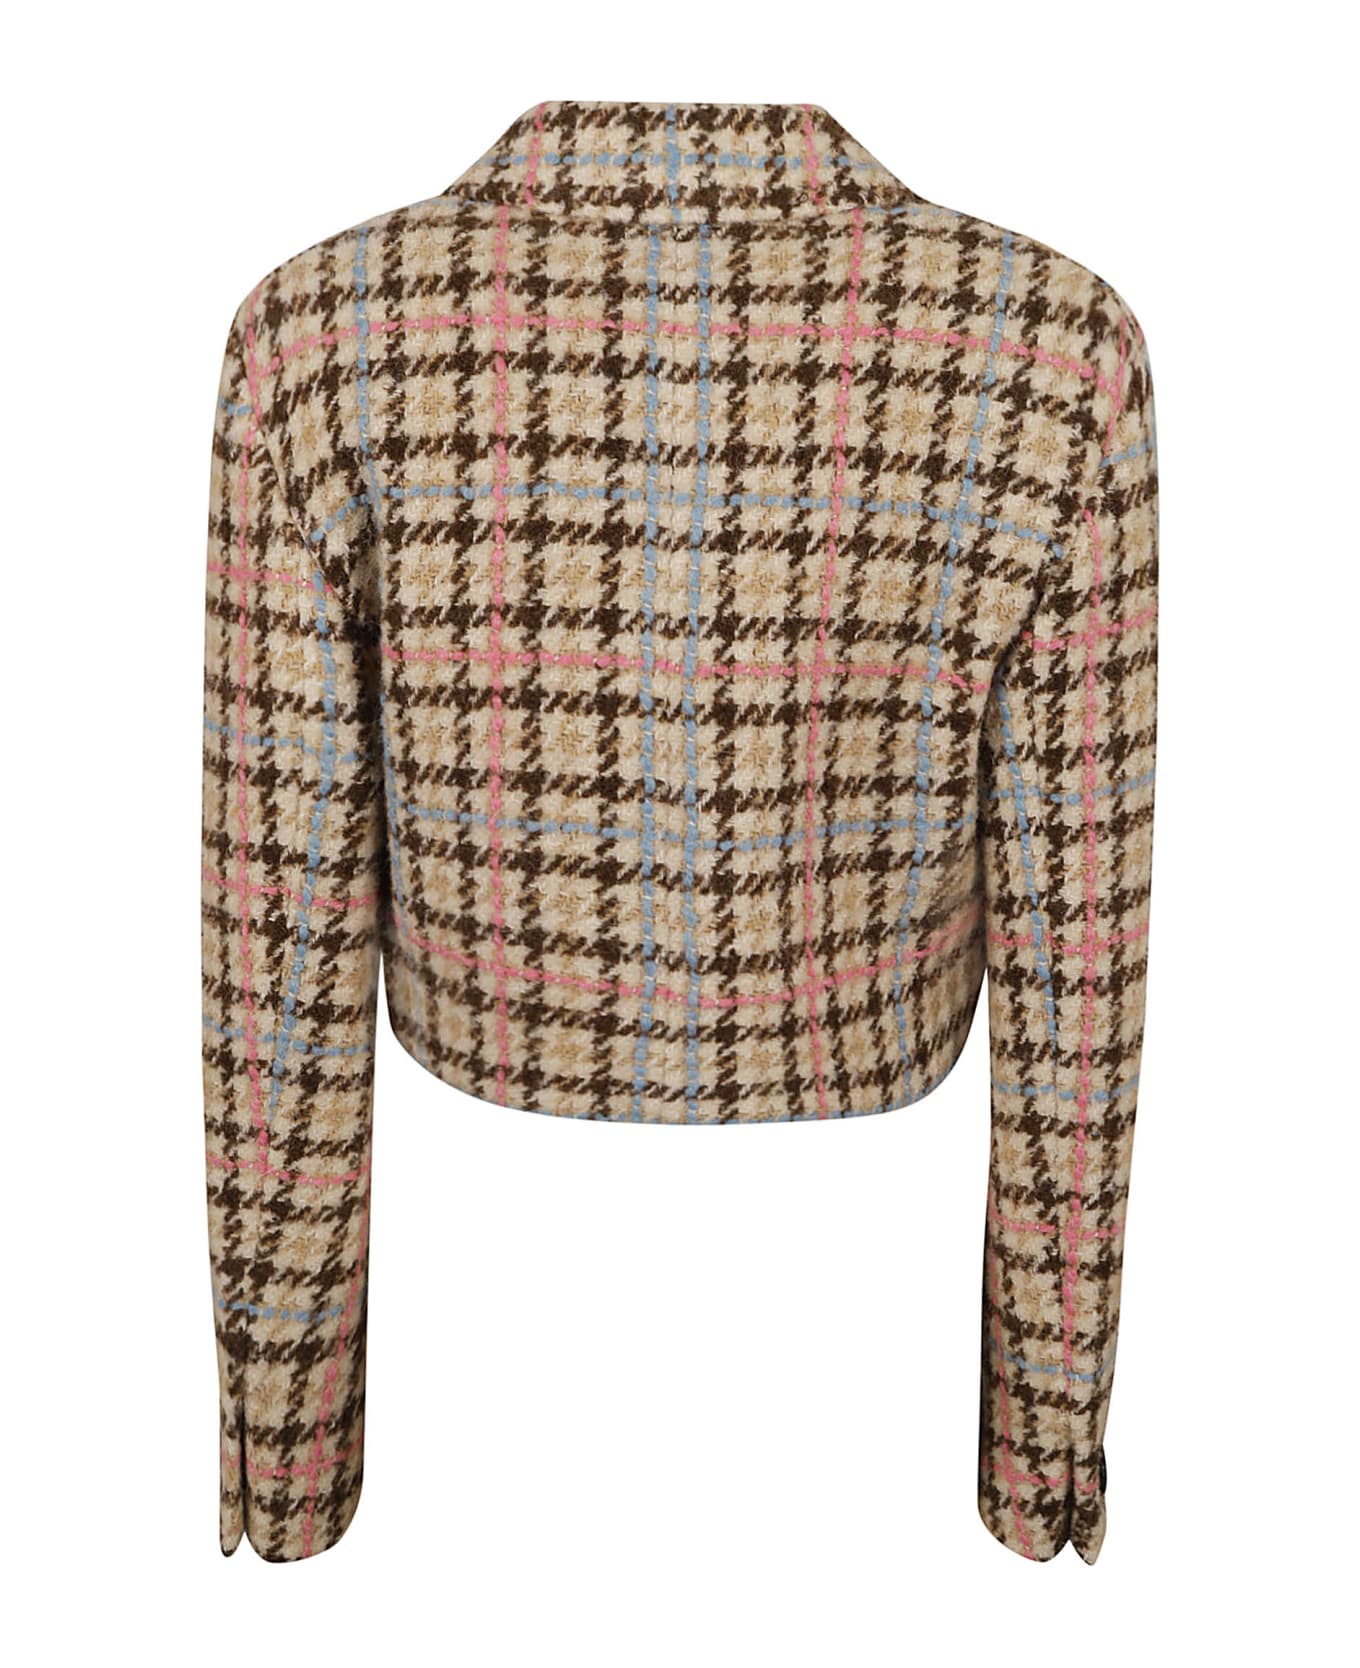 MSGM Houndstooth Cropped Check Jacket - Beige ブレザー